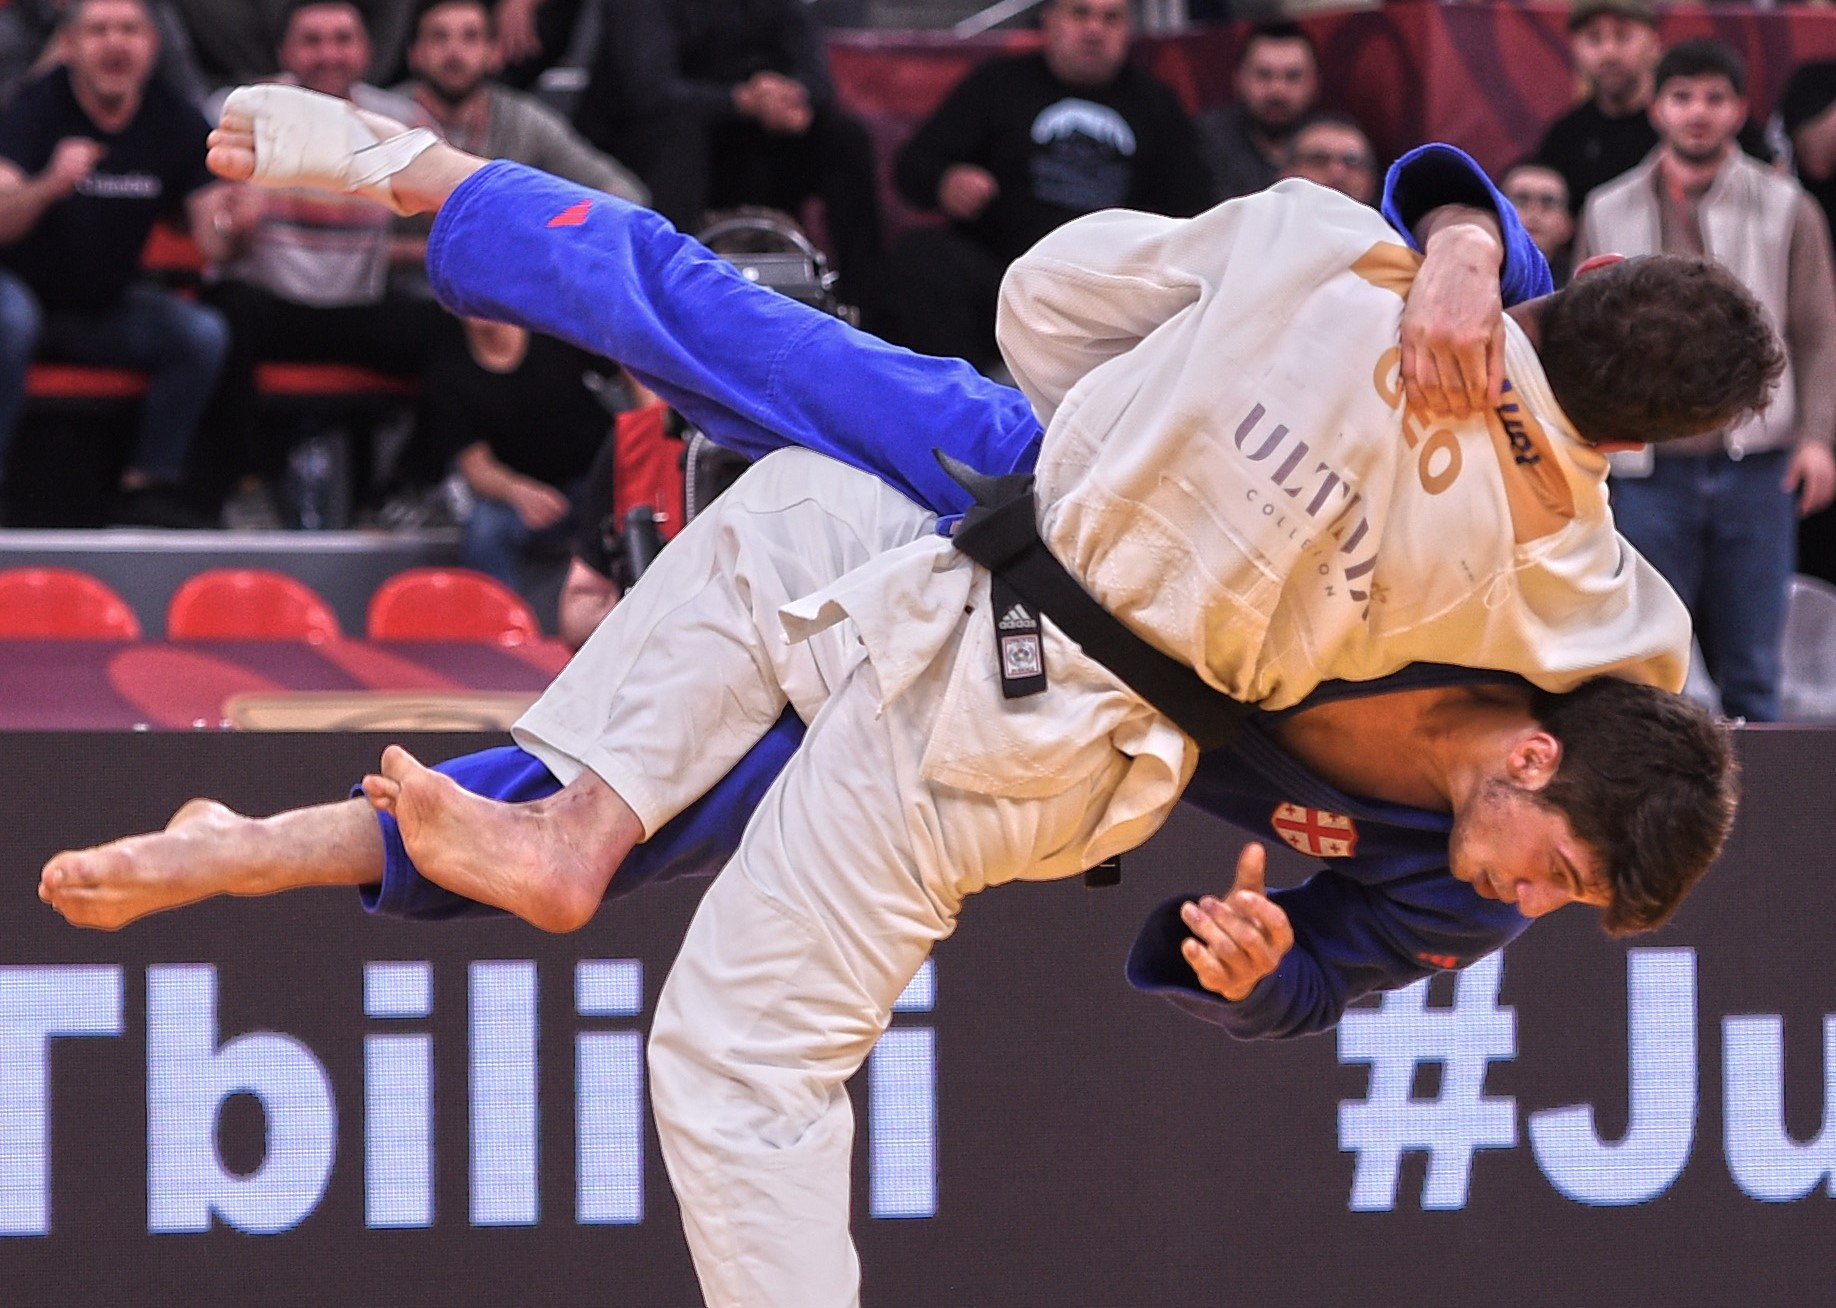 Georgian judokas won three golds on the final day in Tbilisi to send them top of the standings ©IJF